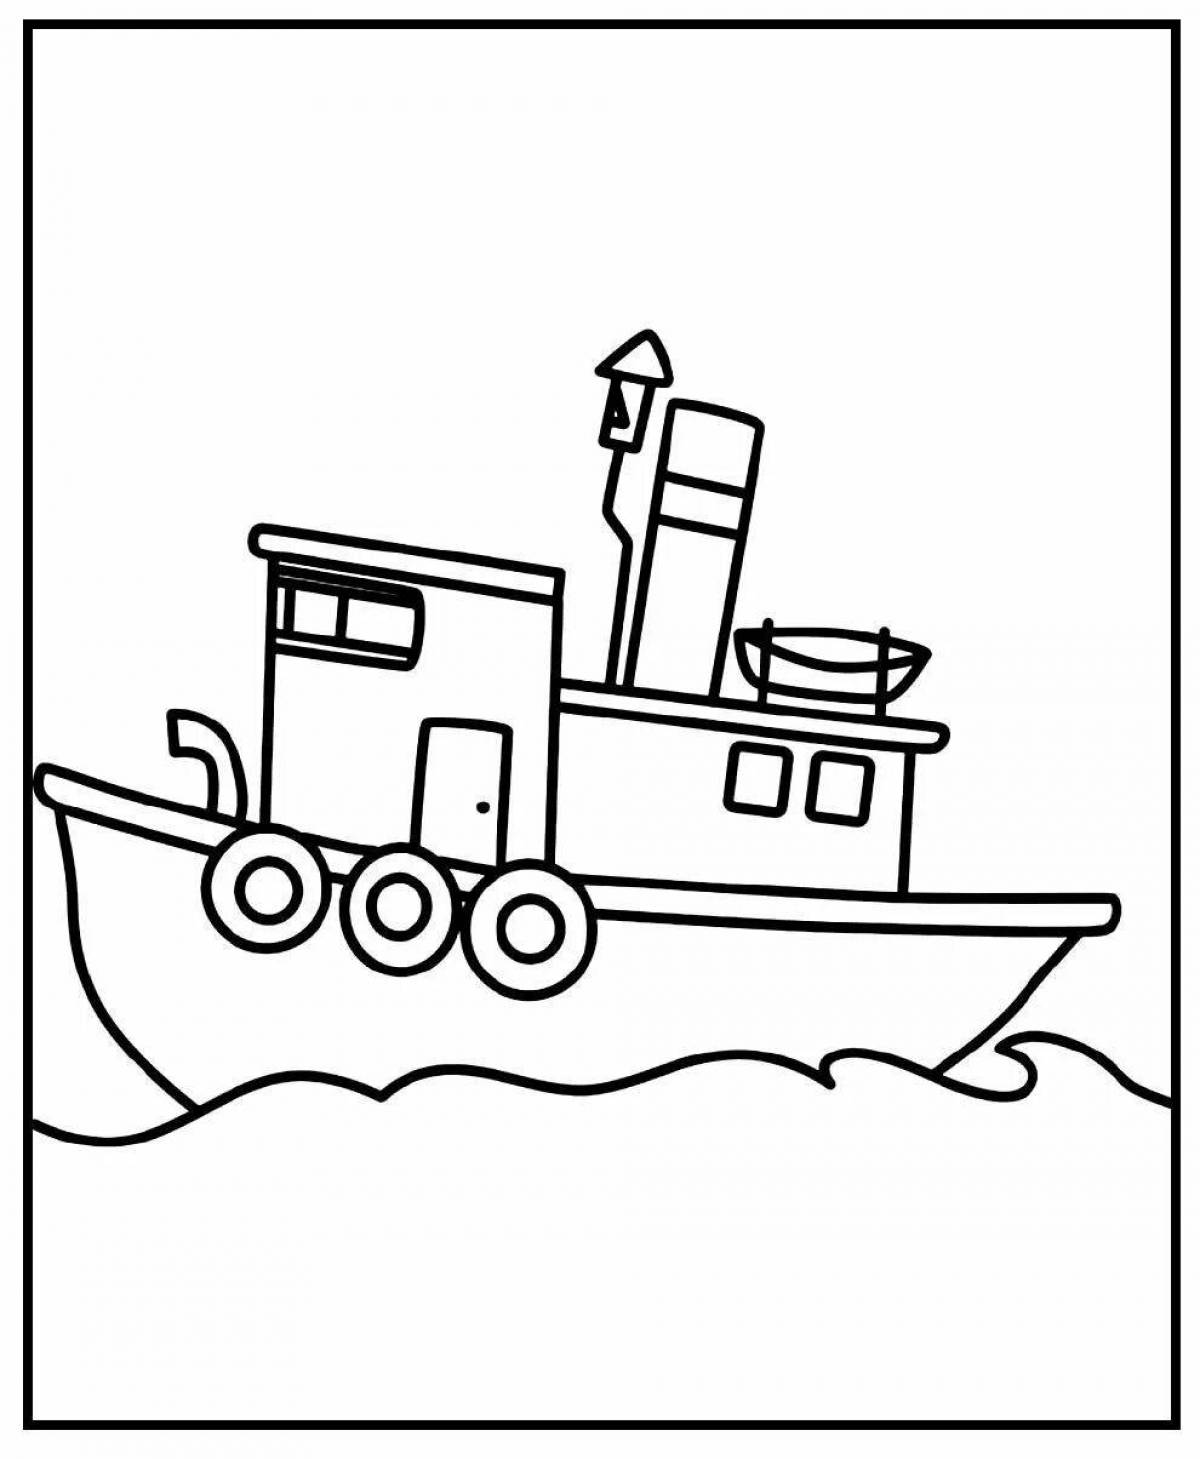 Wonderful water transport coloring pages for kids